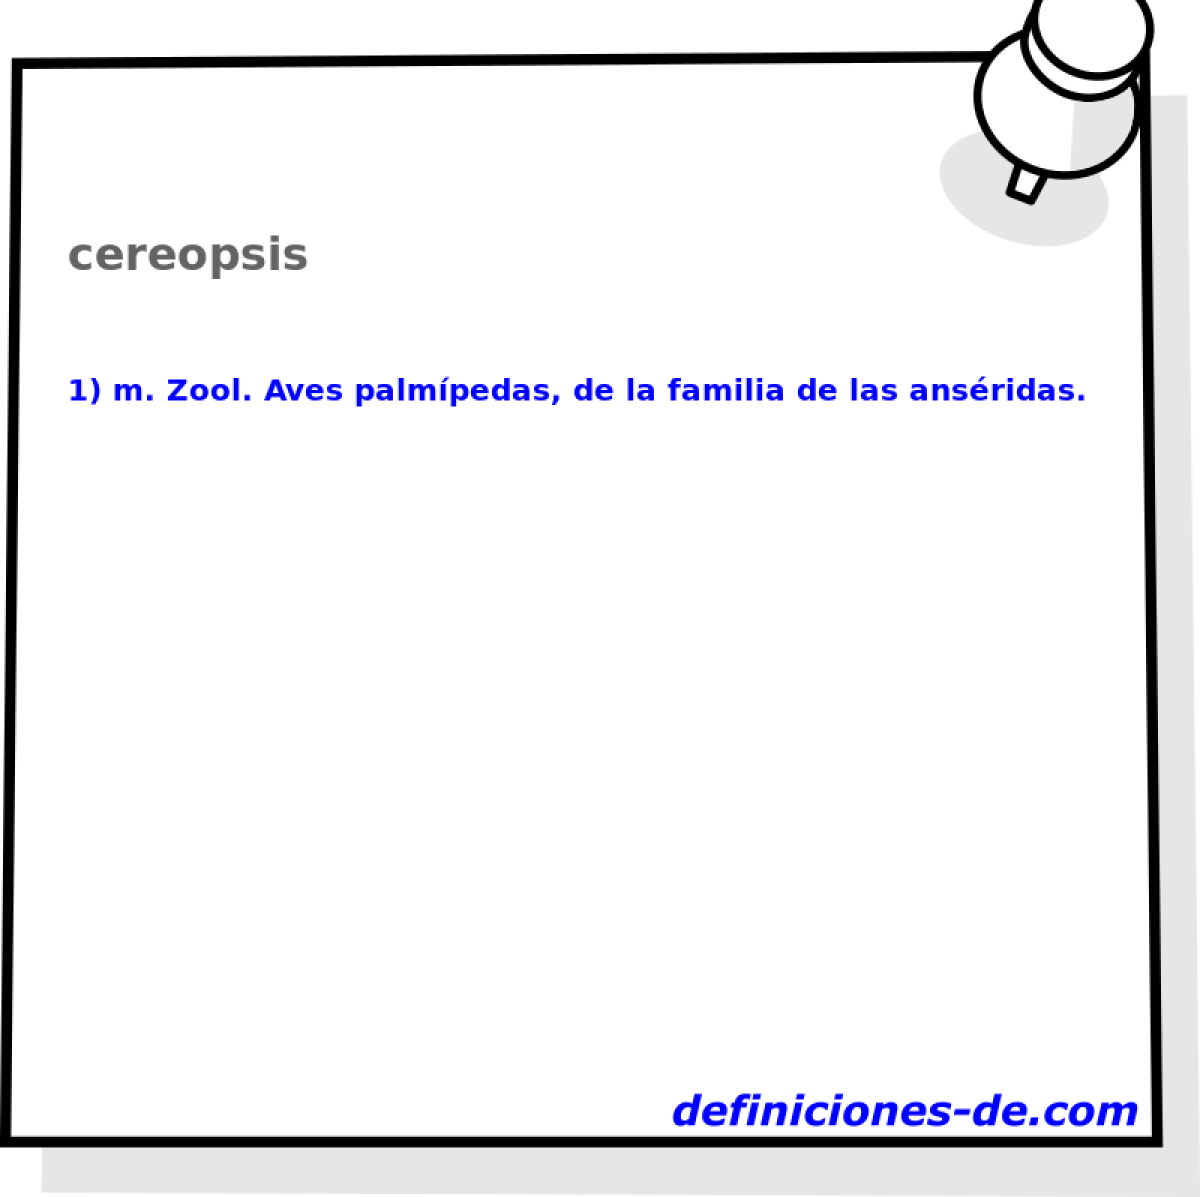 cereopsis 